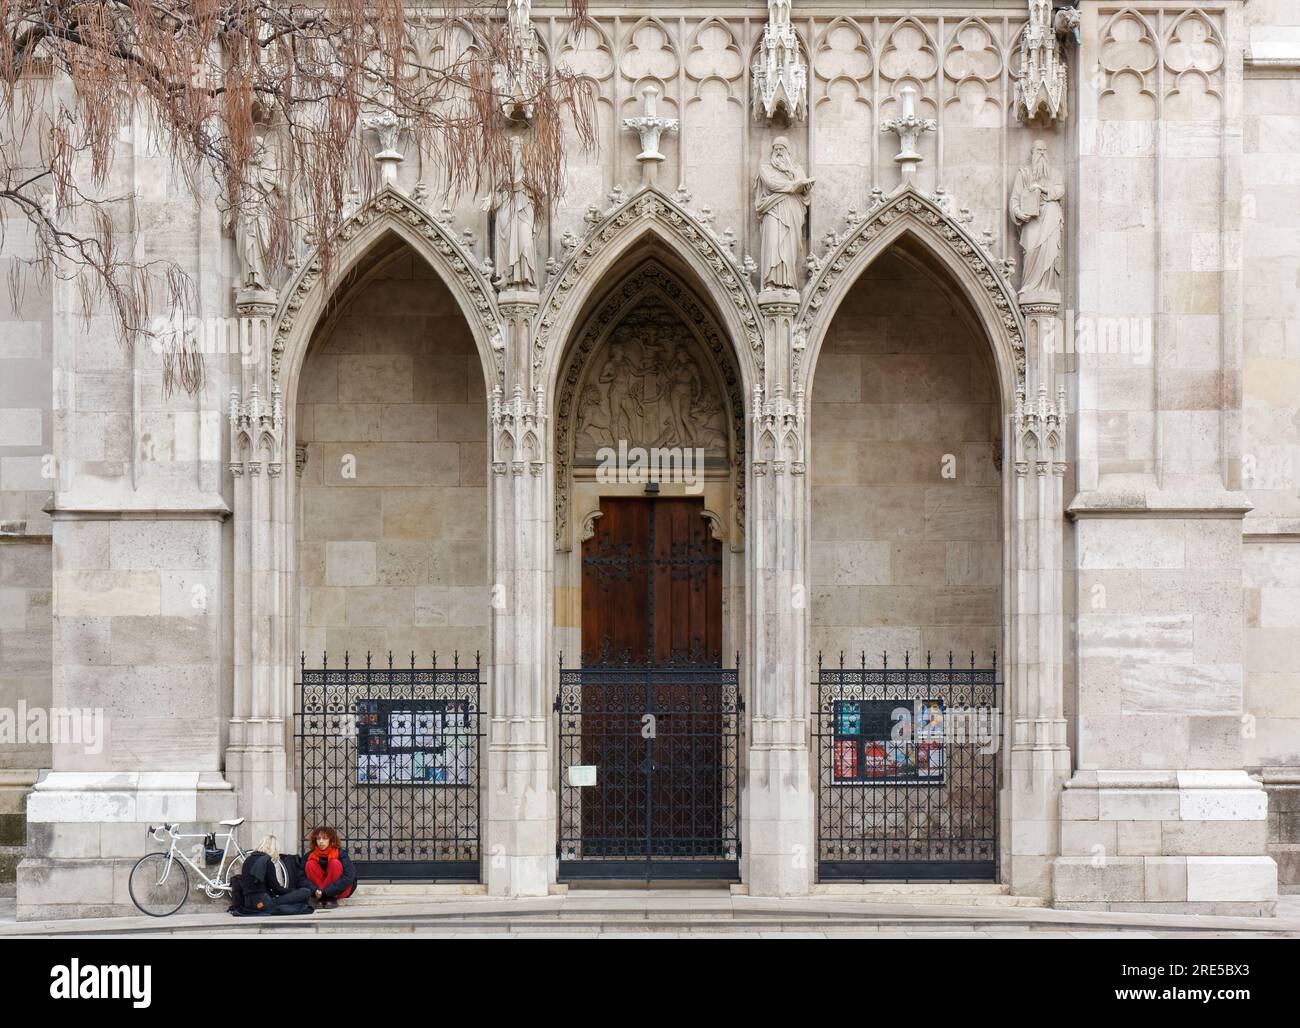 VIENNA, Austria - January 6, 2023: Two girls and a white bicycle in front of an entrance of the neo-gothic Votive Church Stock Photo